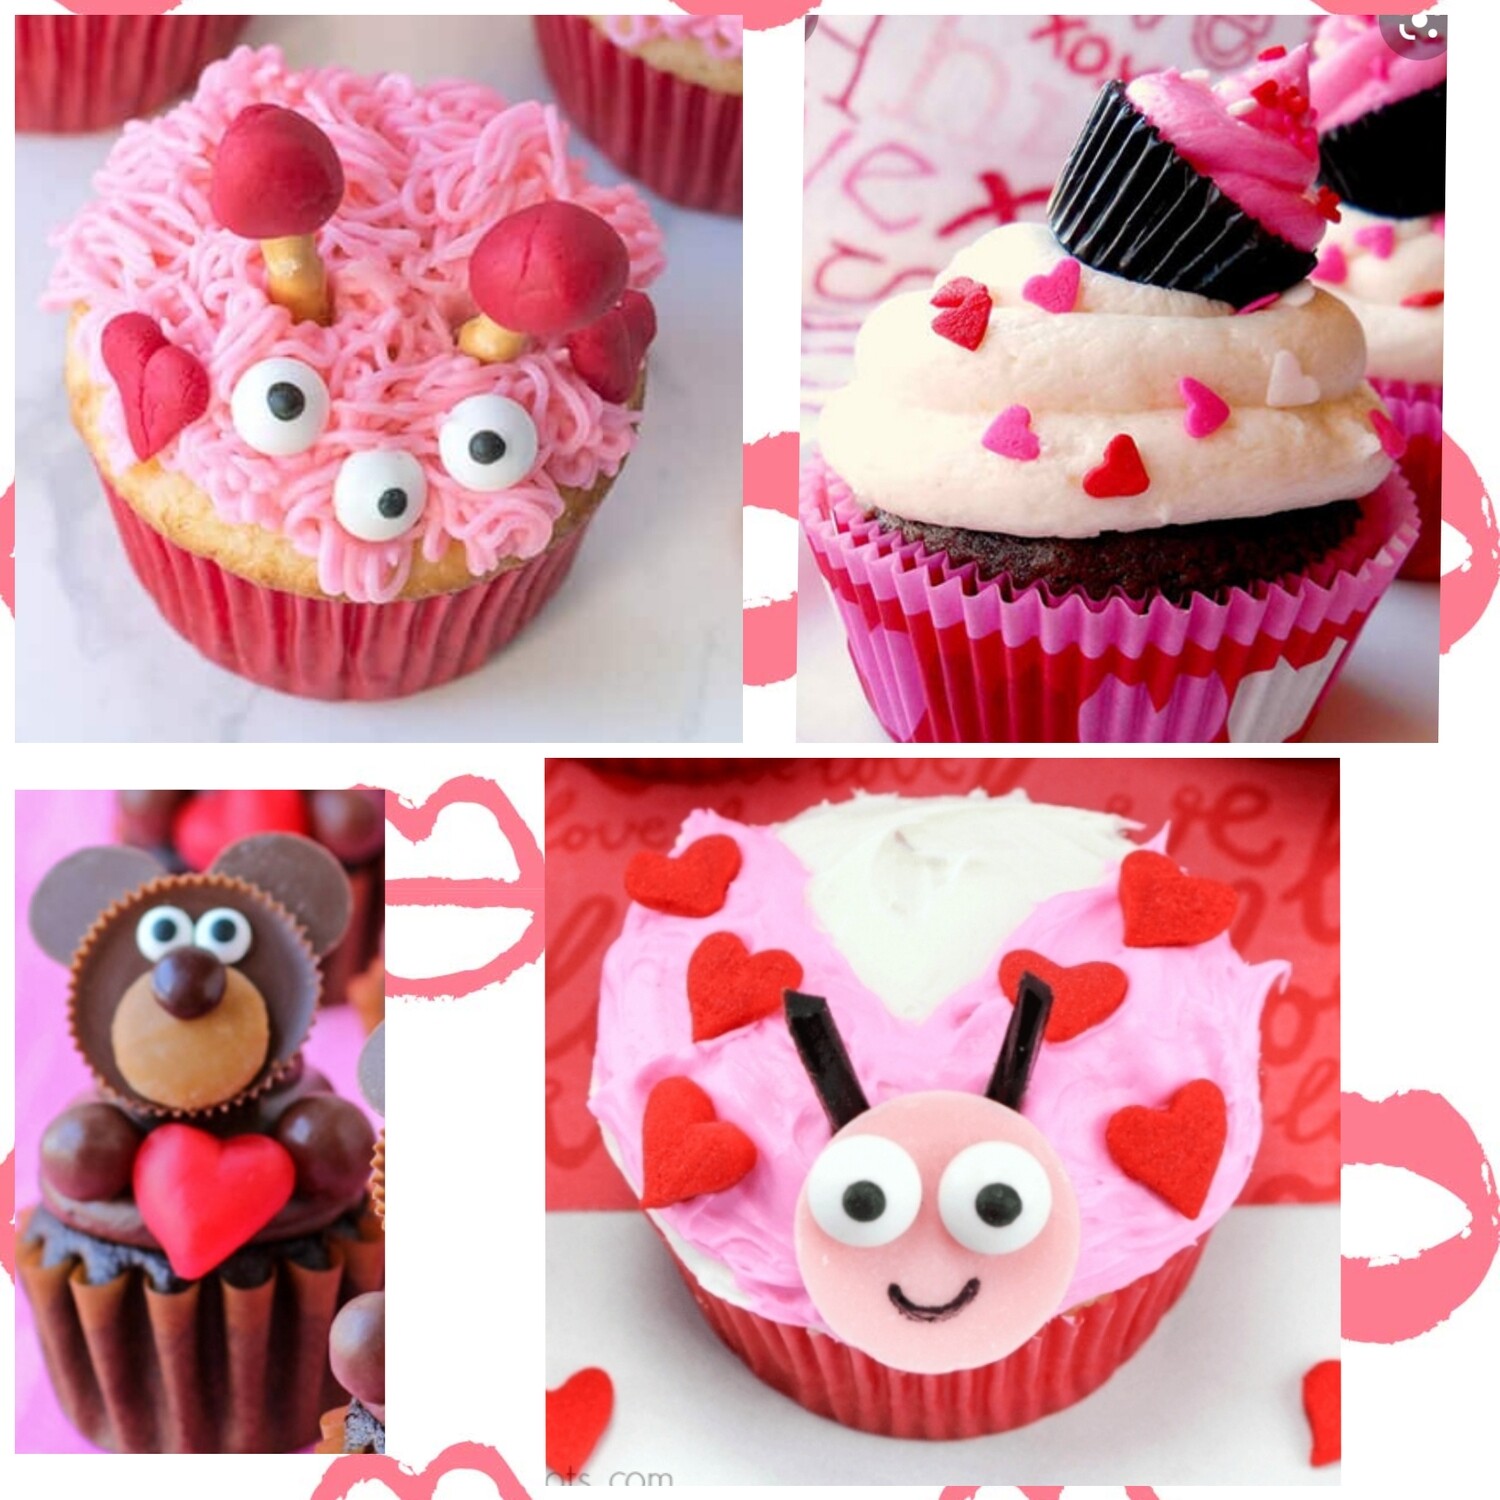 Kids Valentines Day Cupcake Decorating Class Sunday February 13th from 12pm to 2pm